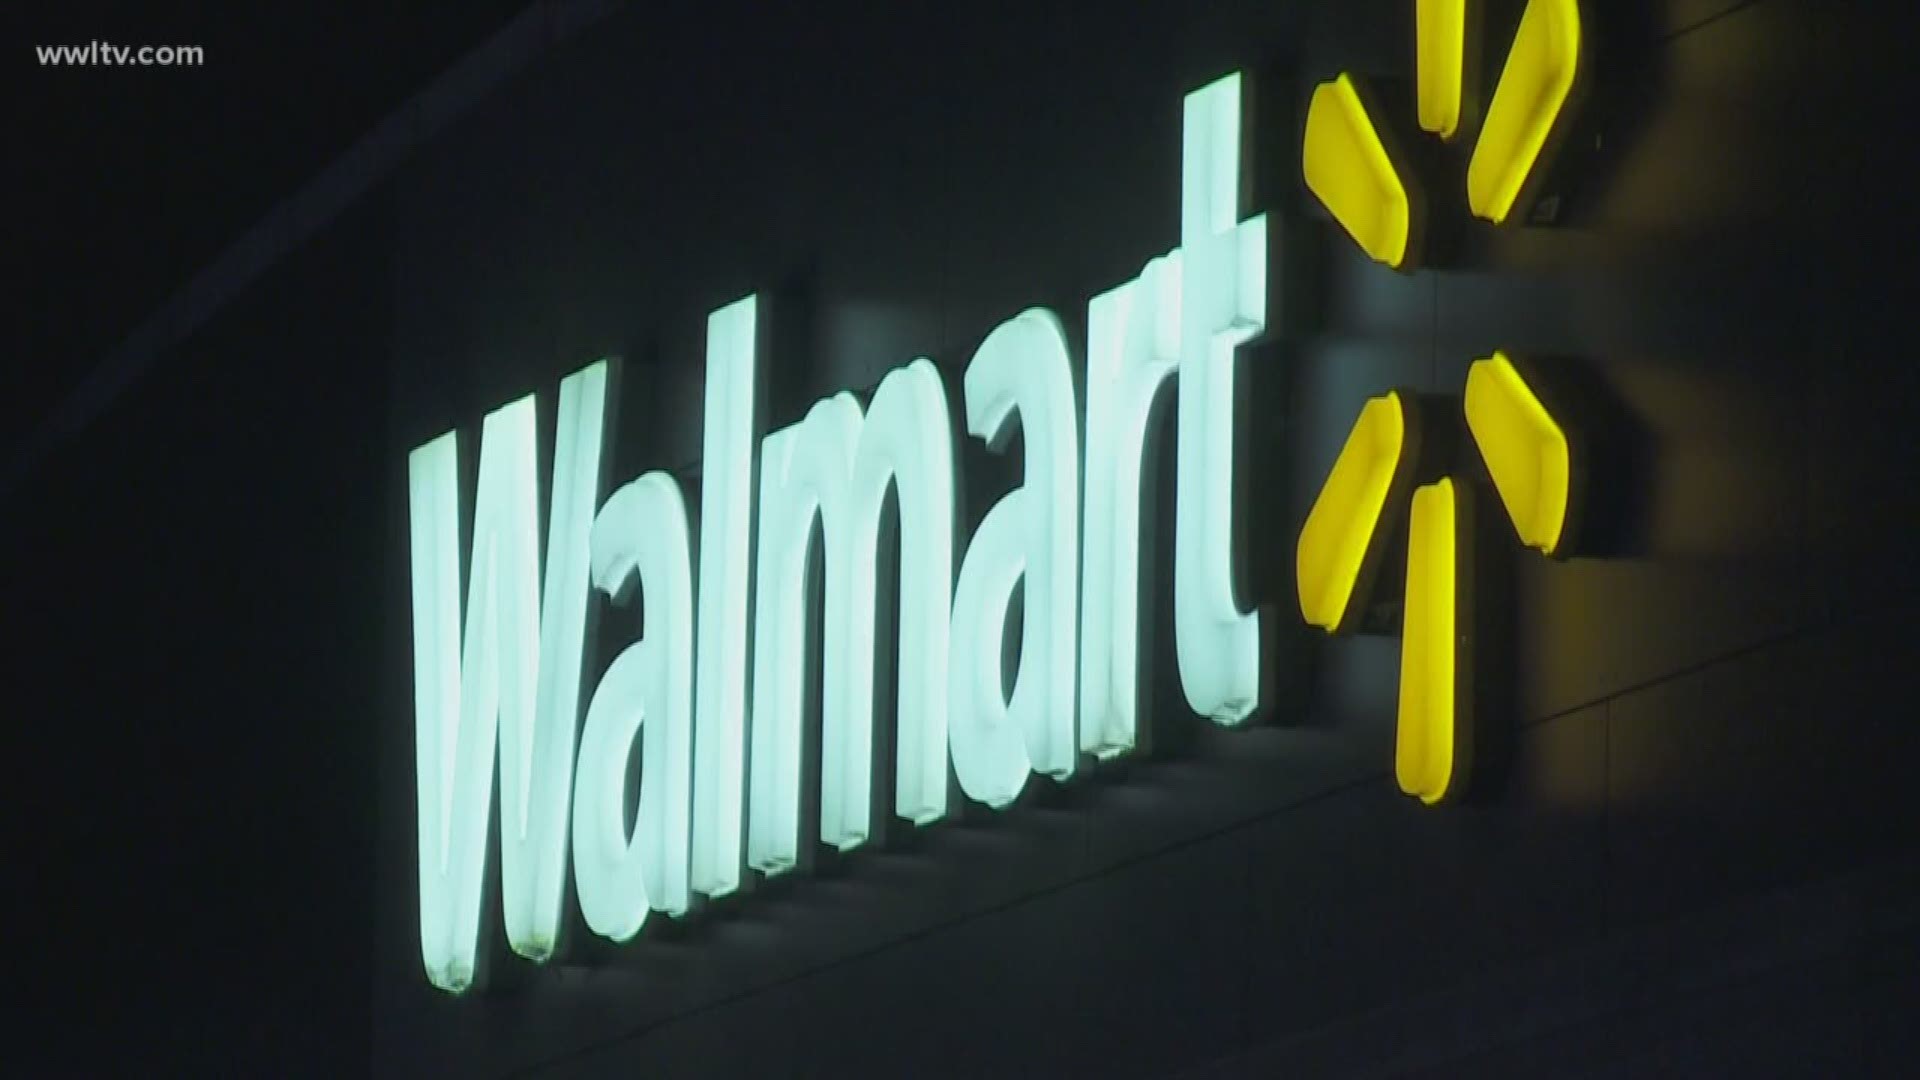 The Walmart were a worker was shot and killed Monday night remained closed the next morning. Sources tell WWL-TV counselors will be available on site for employees.